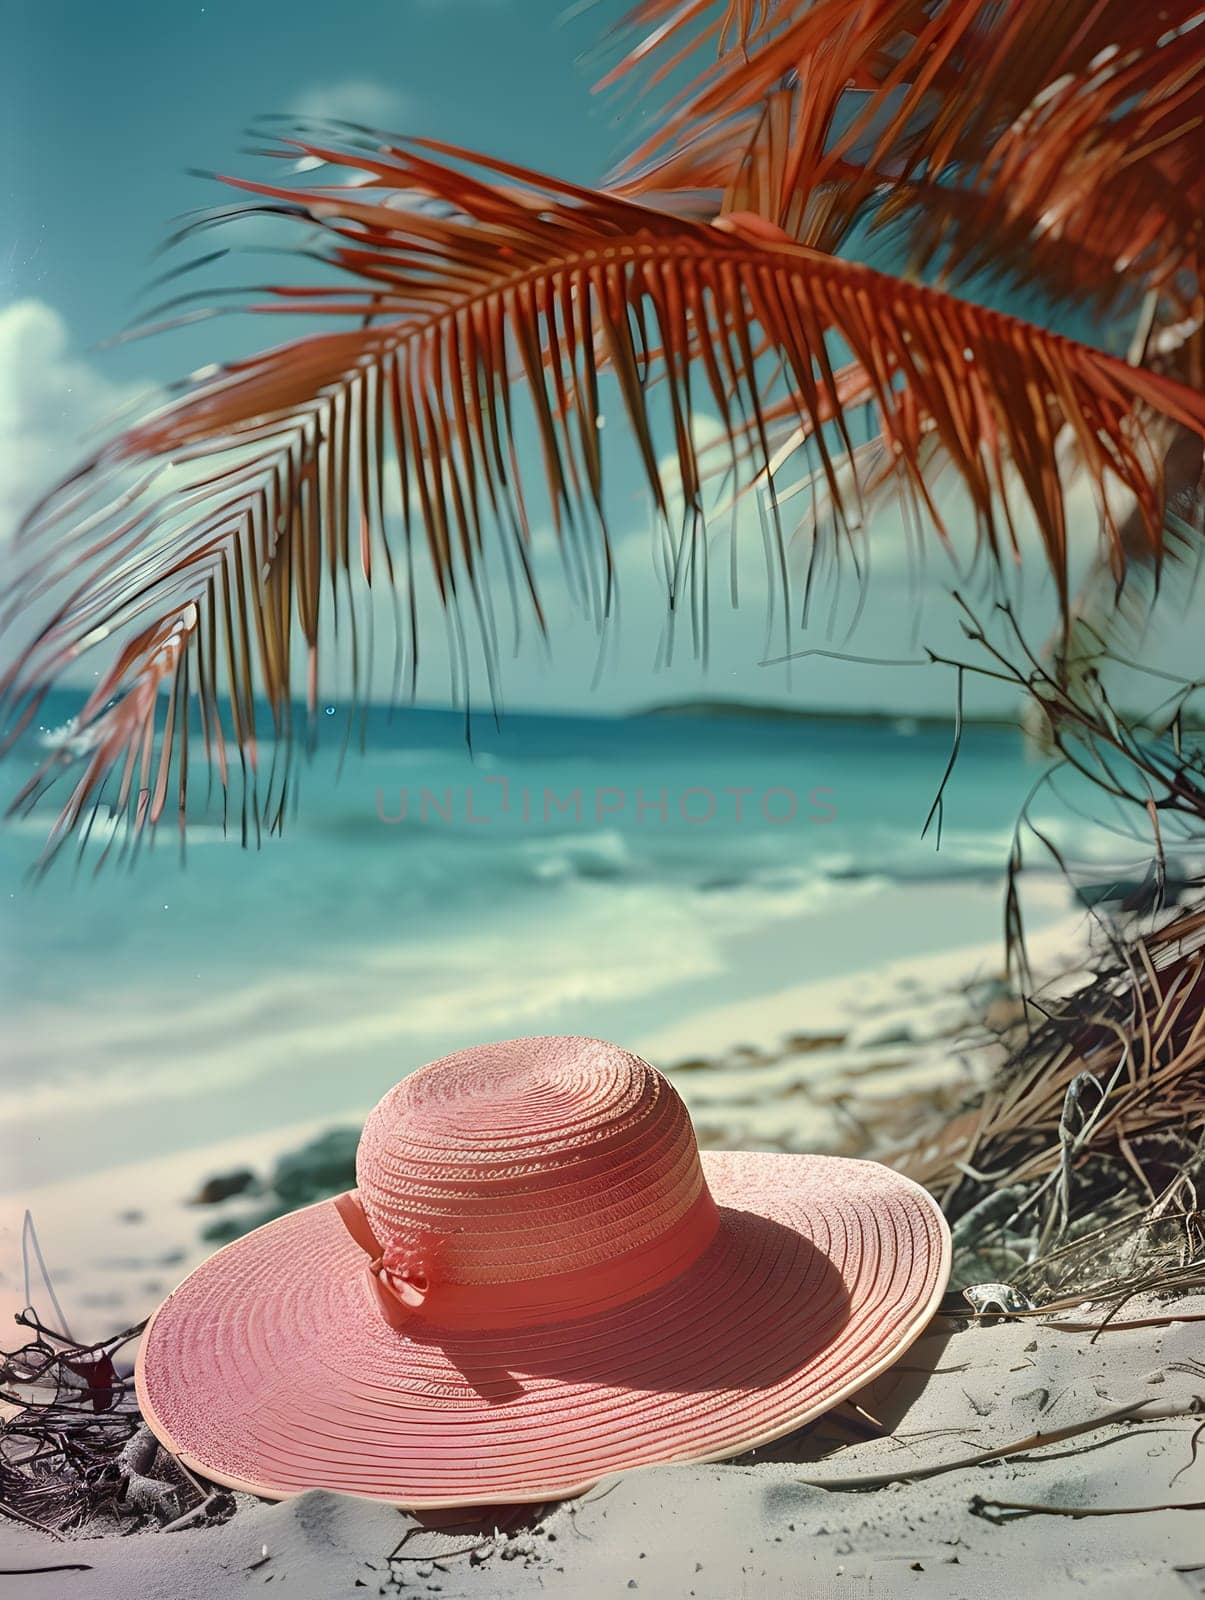 a pink hat is on the beach under a palm tree by Nadtochiy